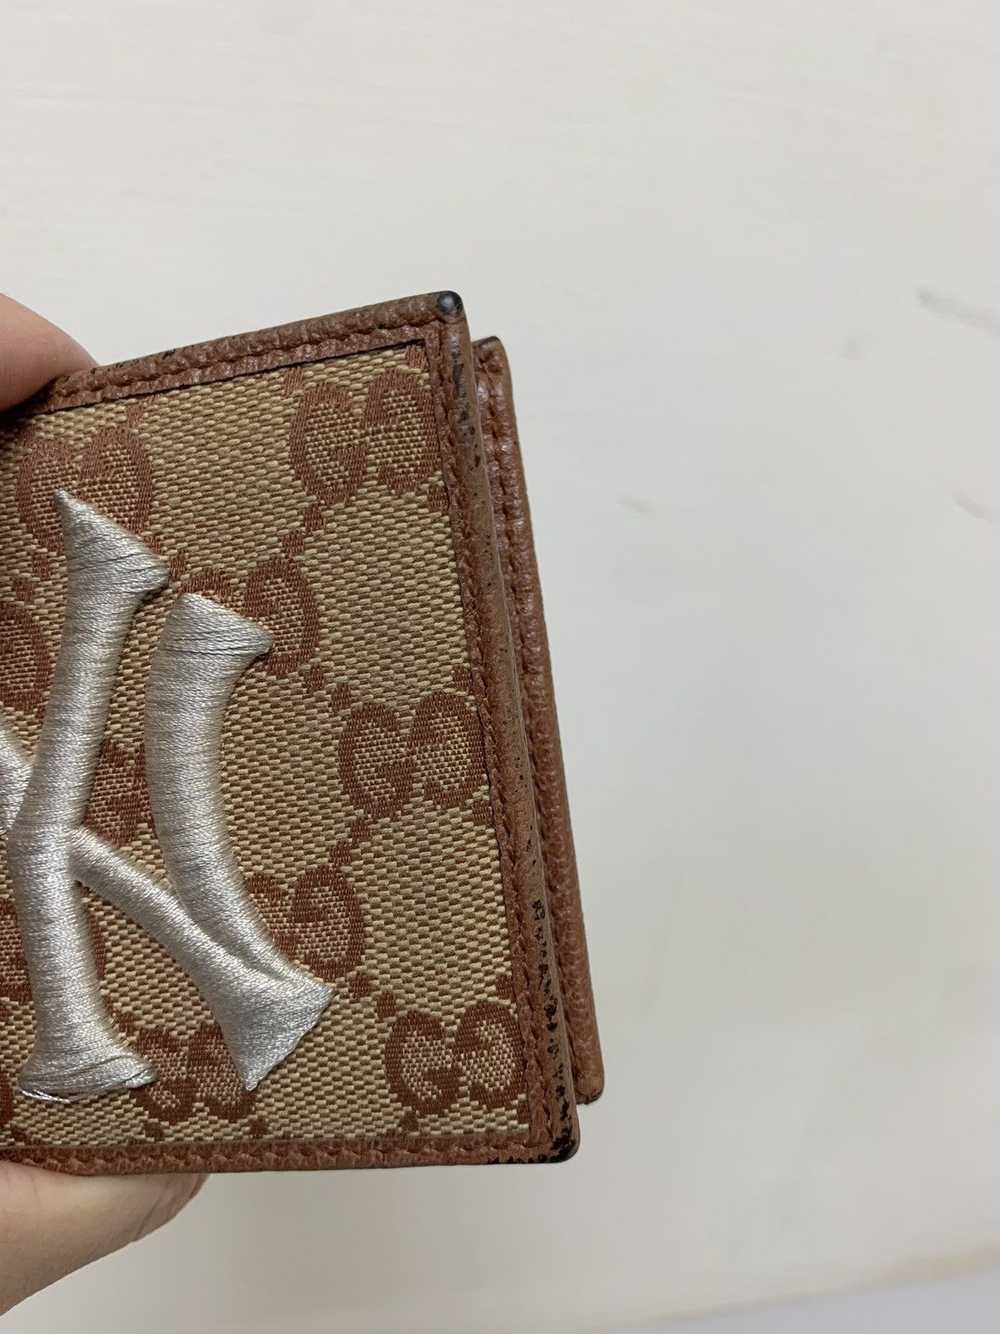 Gucci Gucci New York Yankees Patch Wallet - image 4